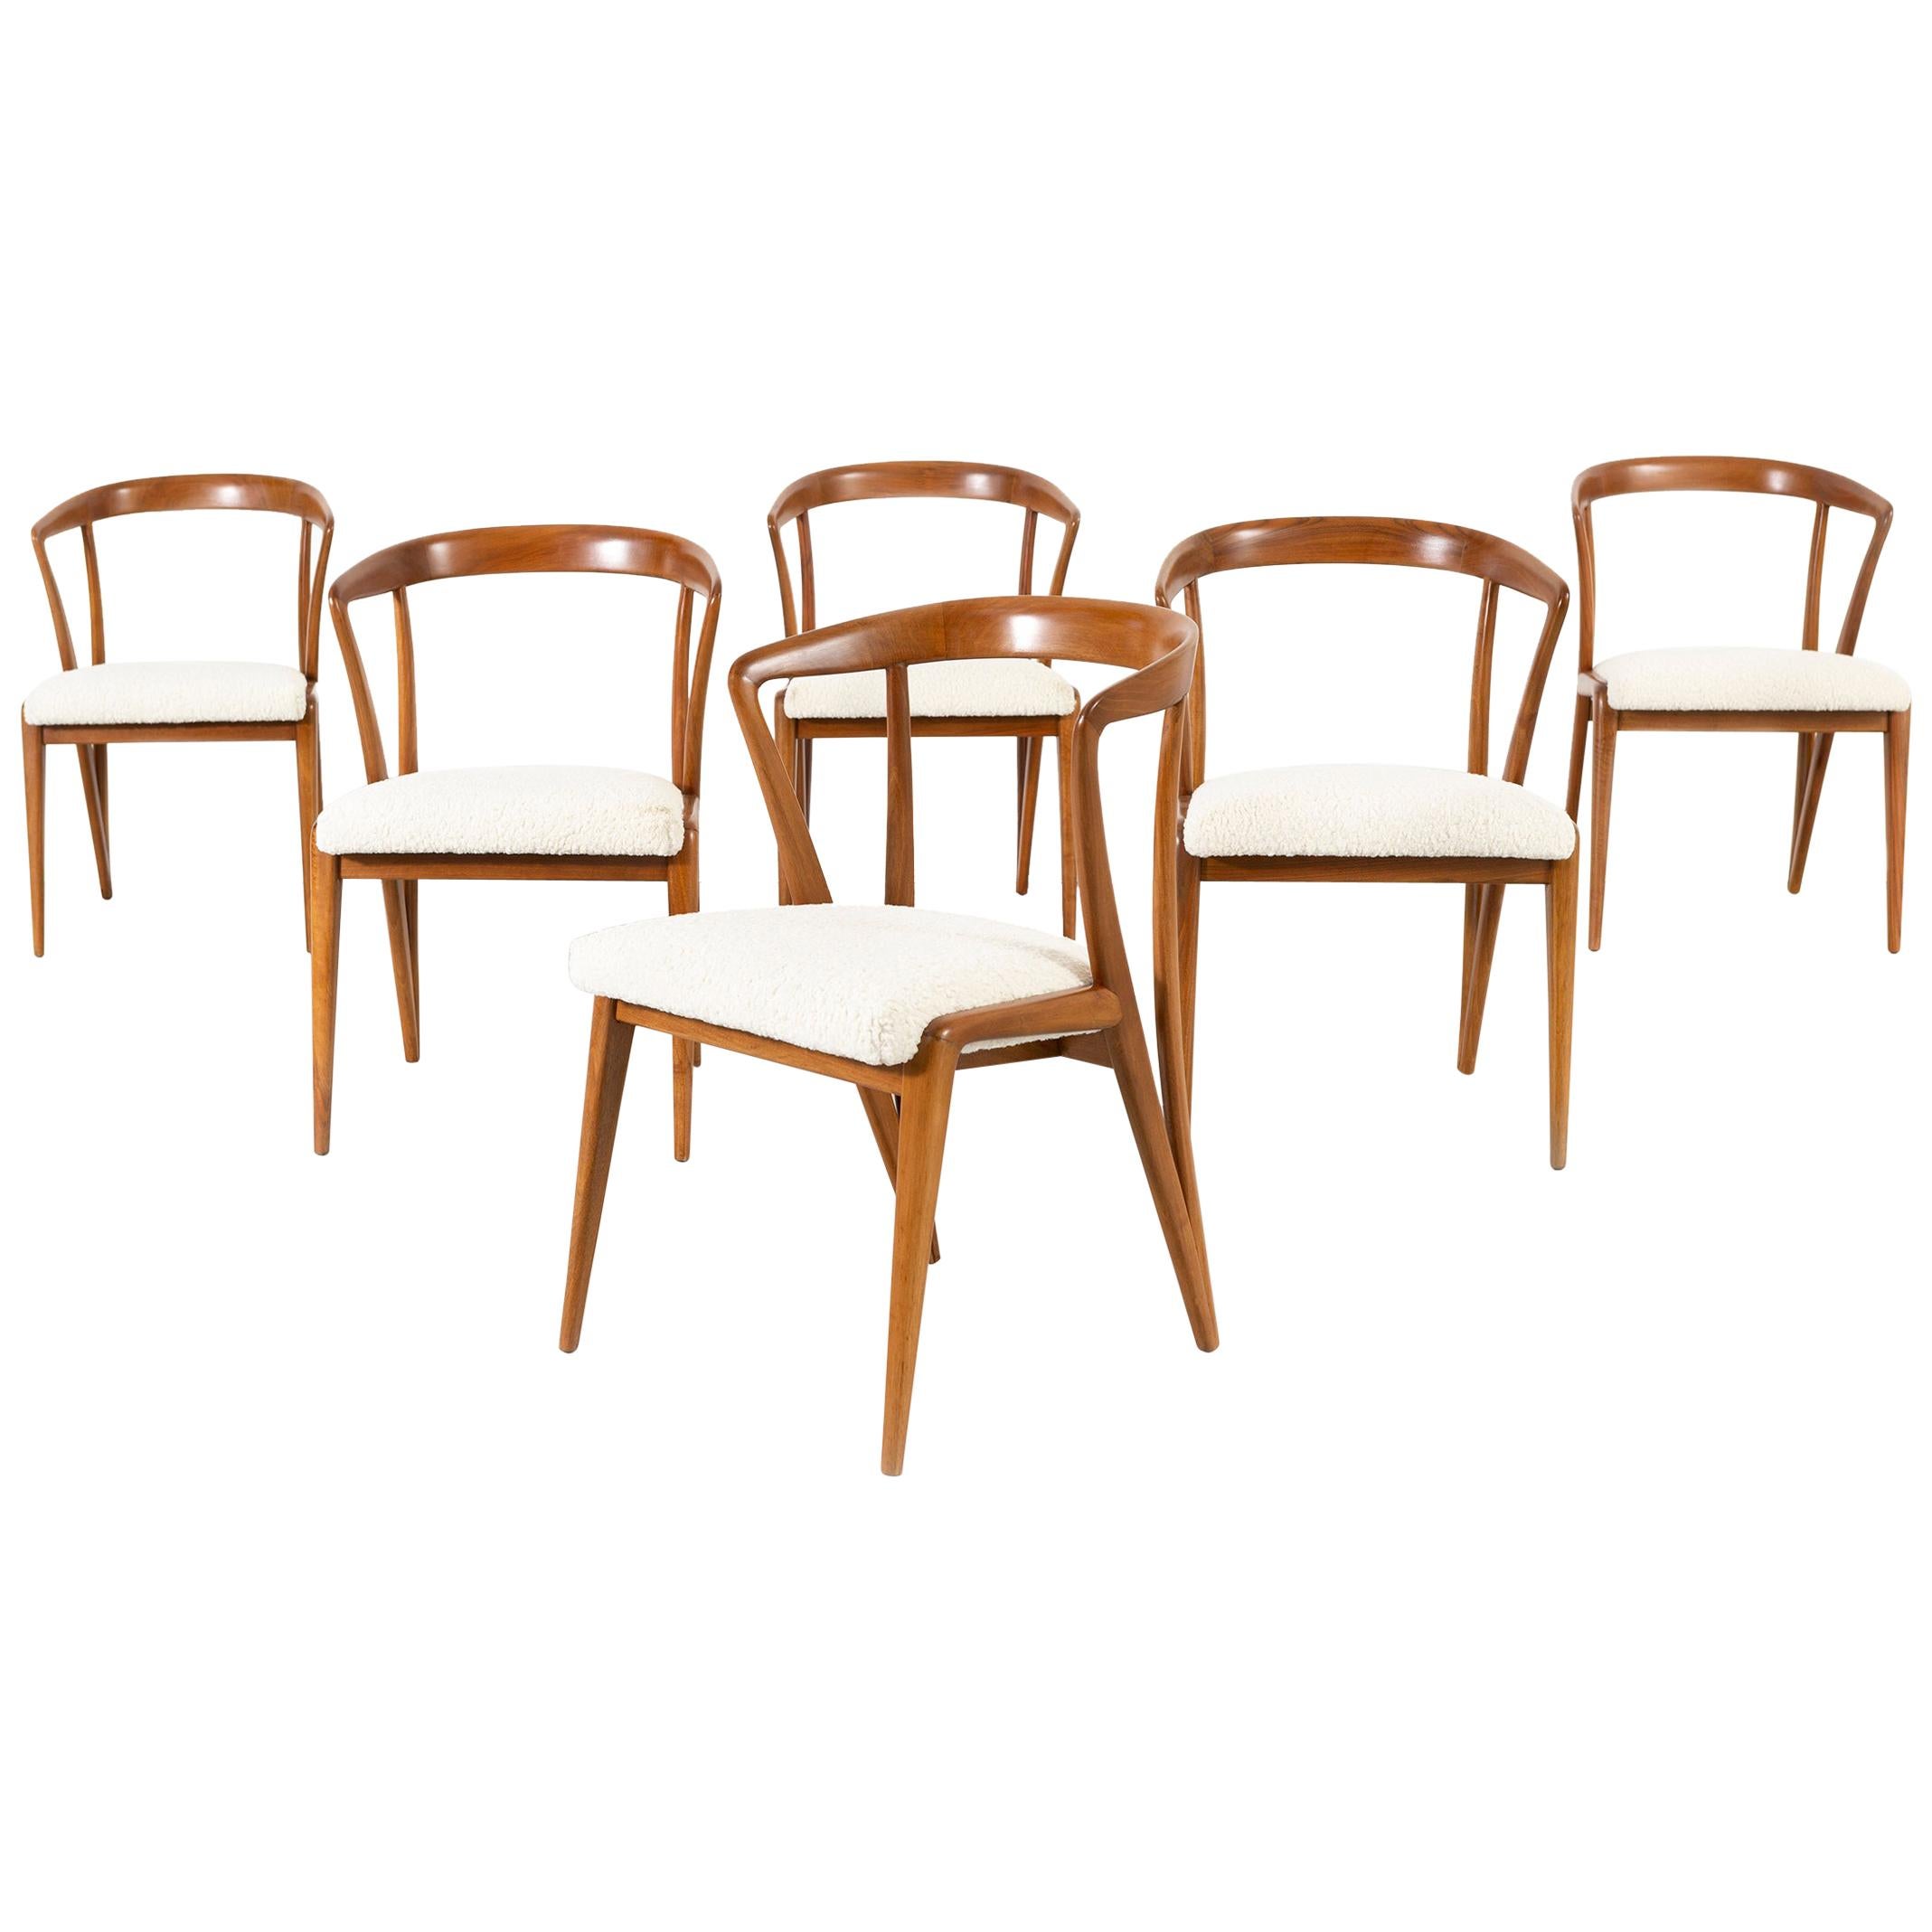 Set of Mid-Century Modern Bertha Schaefer for Singer and Sons Dining Chairs